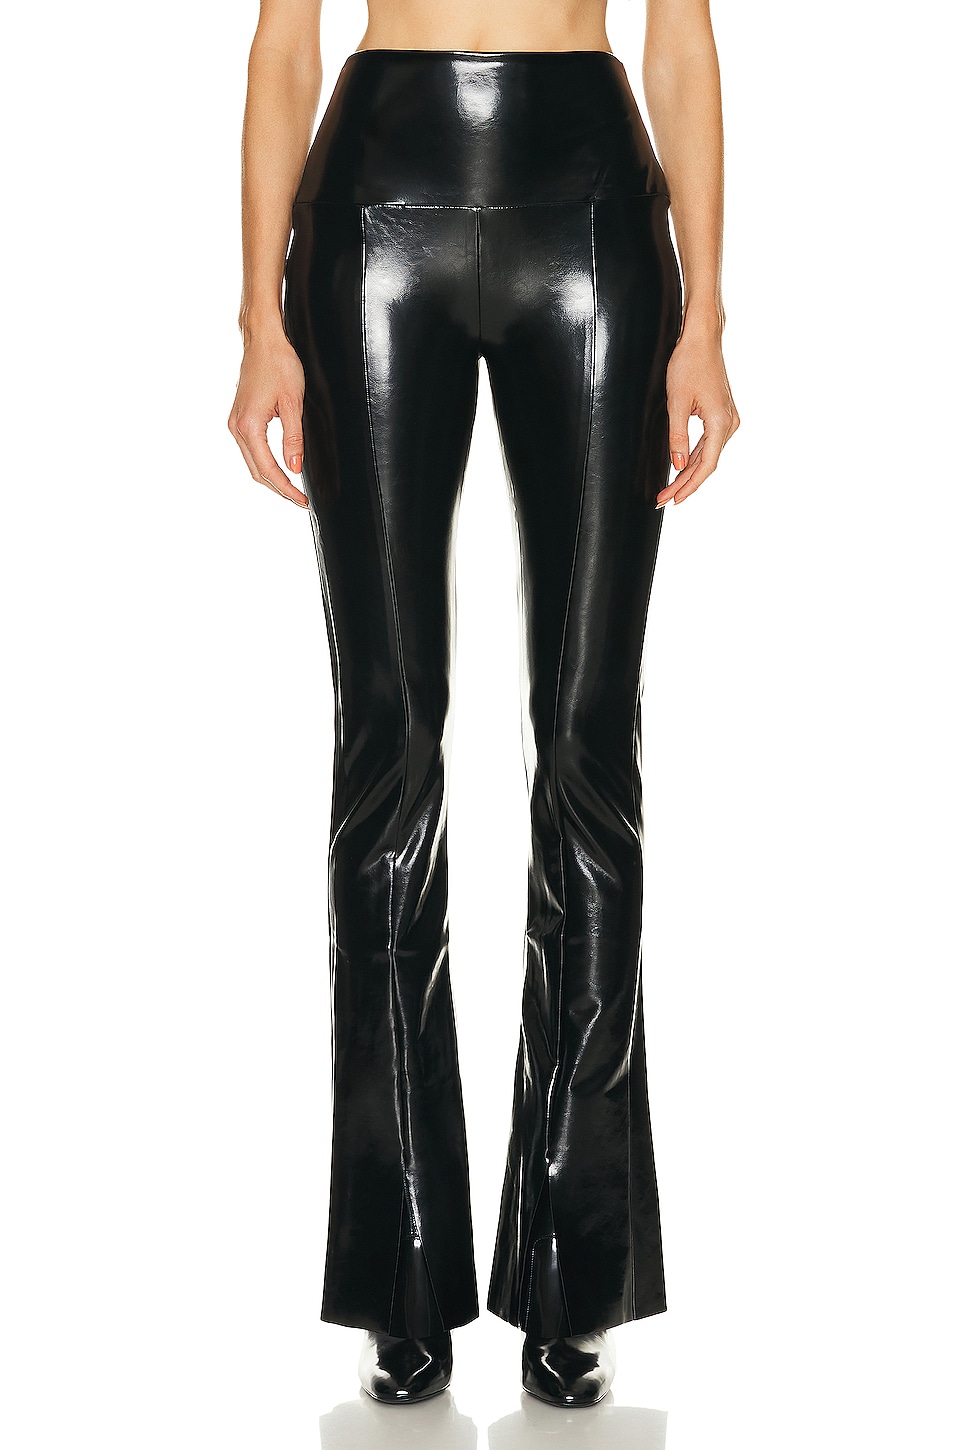 Image 1 of Norma Kamali Faux Leather Spat Legging in Black